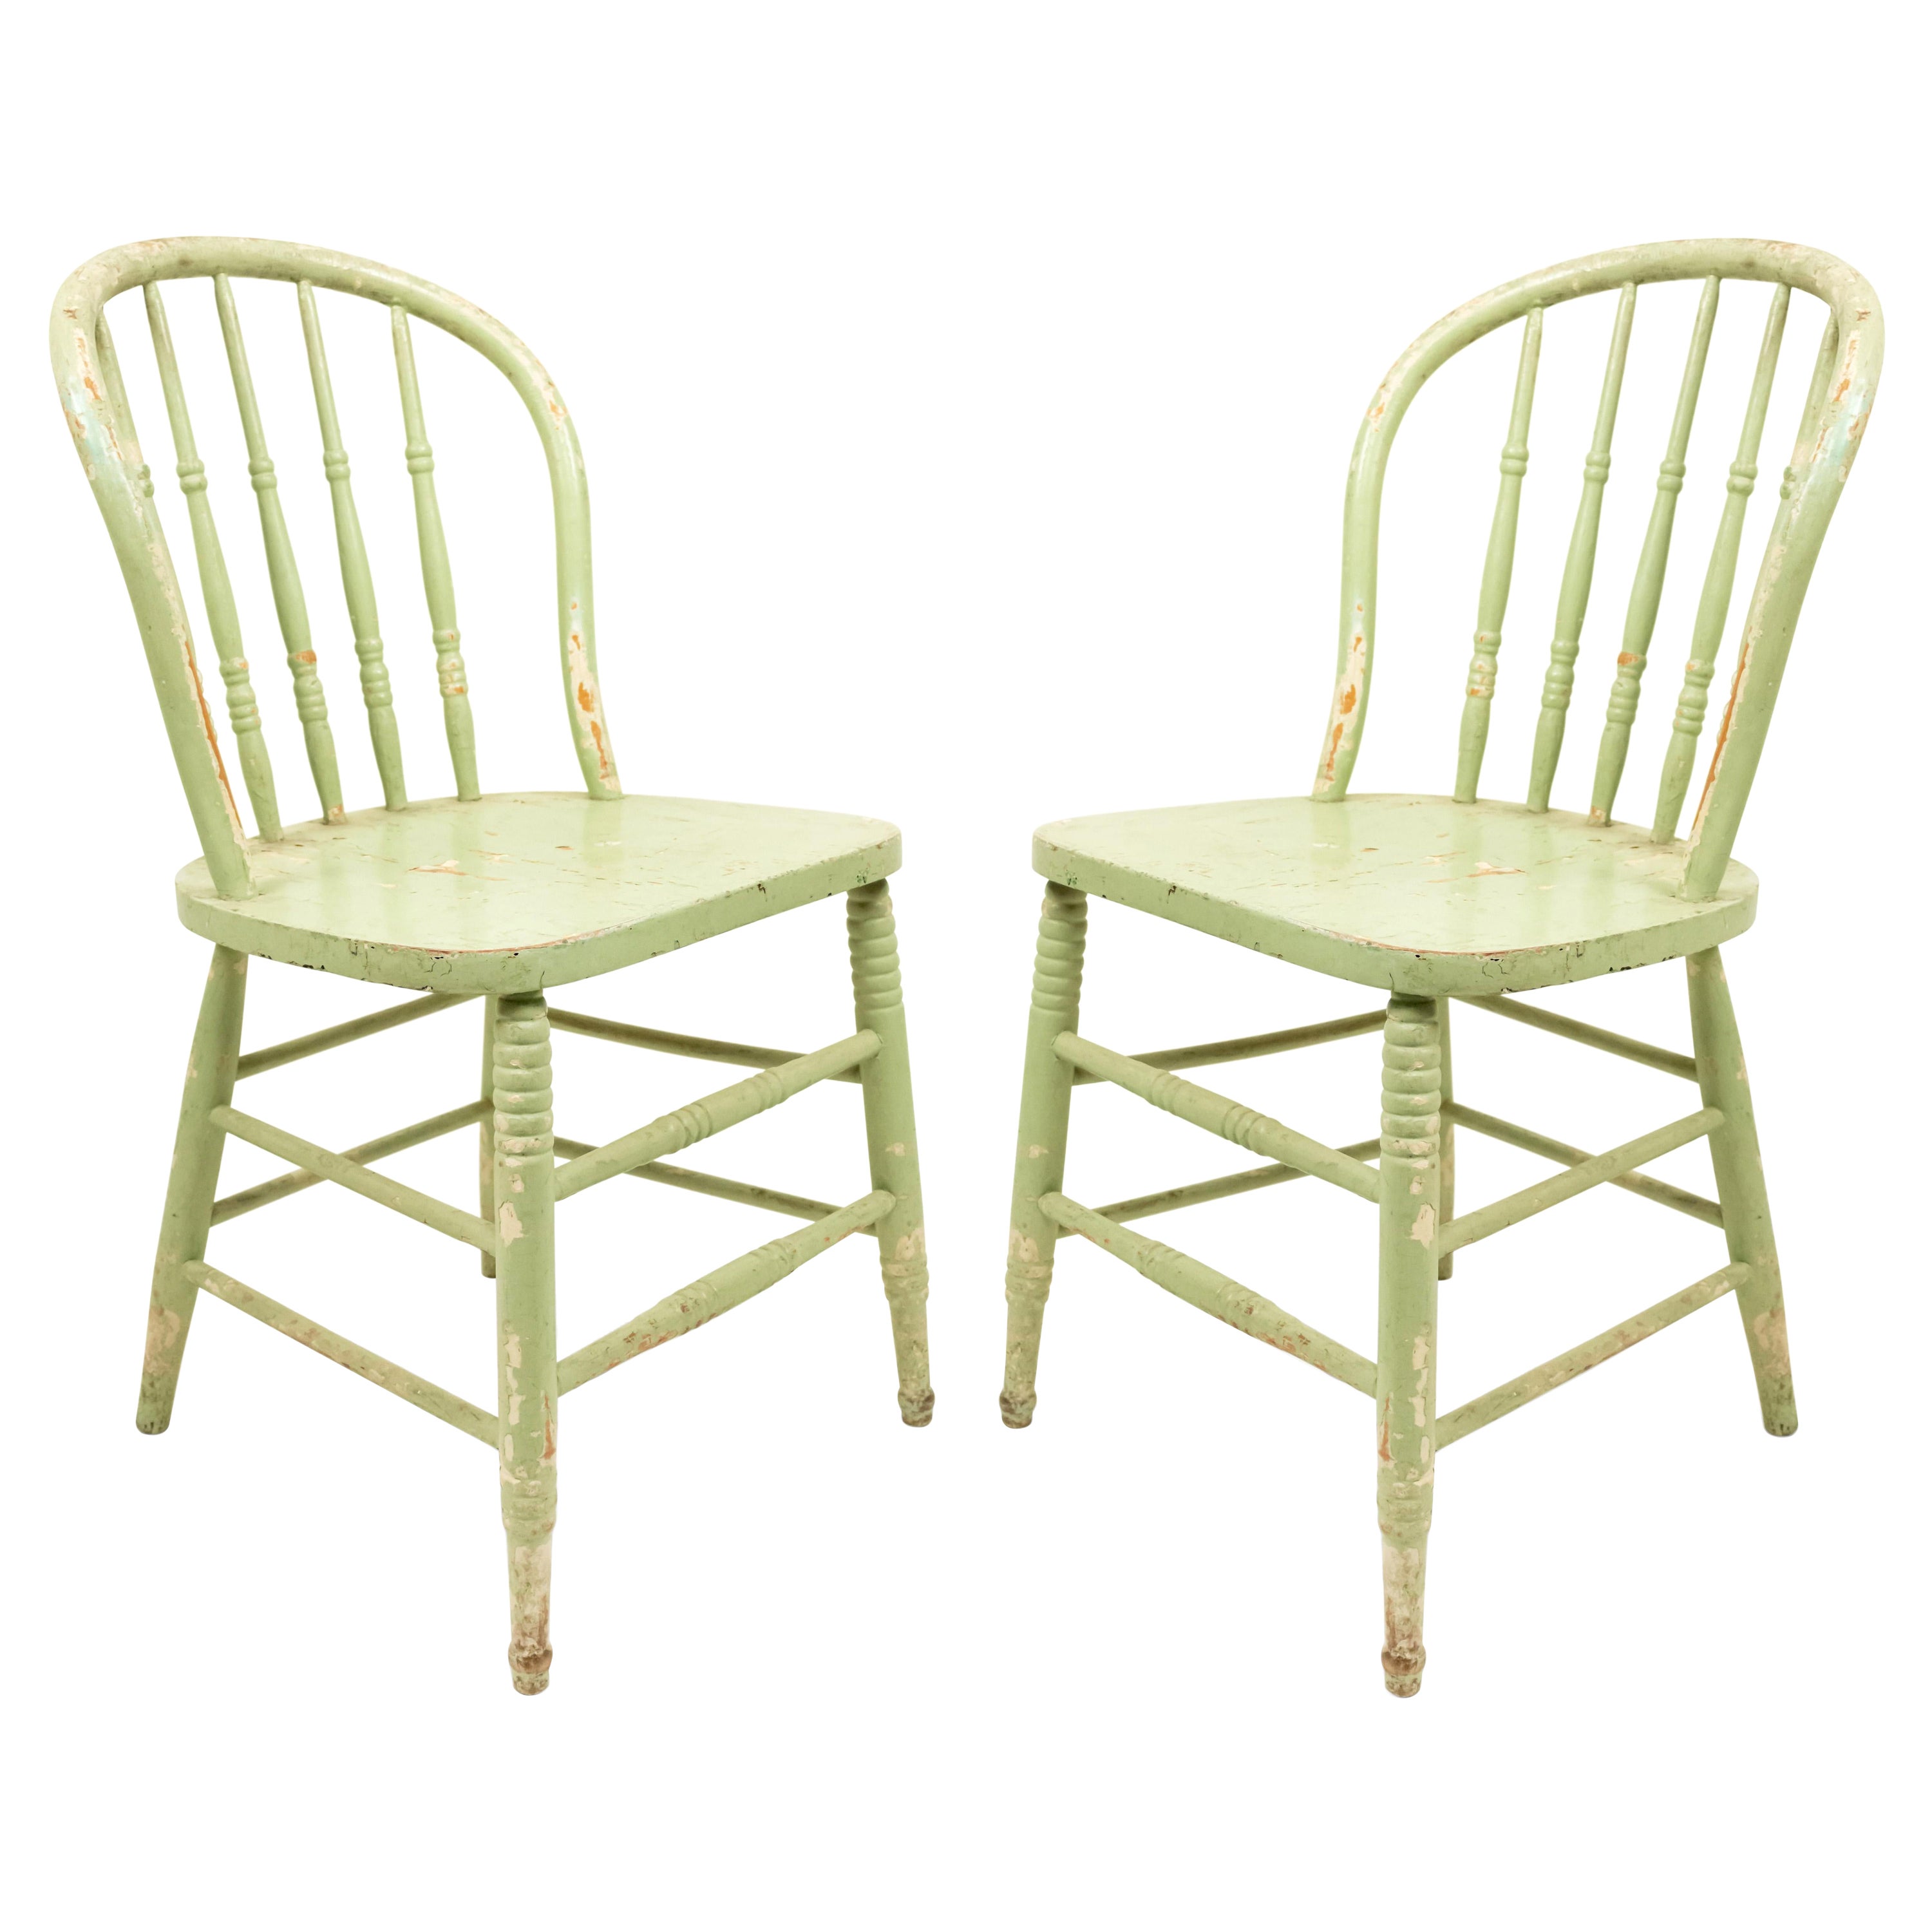 5 American Country Green Spindle Side Chairs For Sale